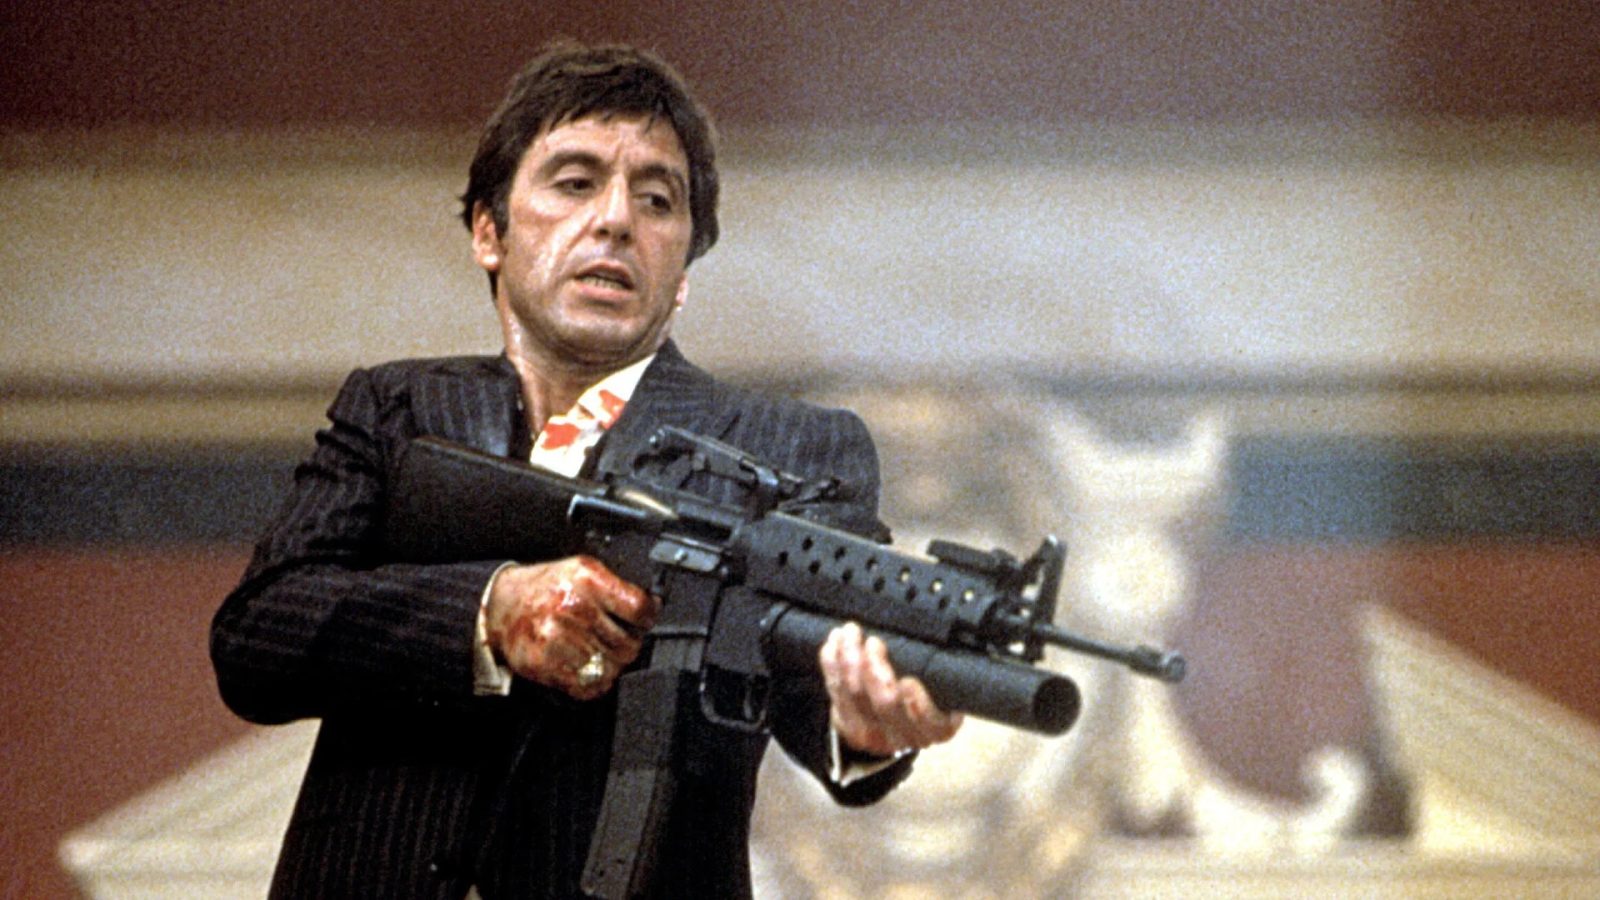 Scarface: the remake is without a director